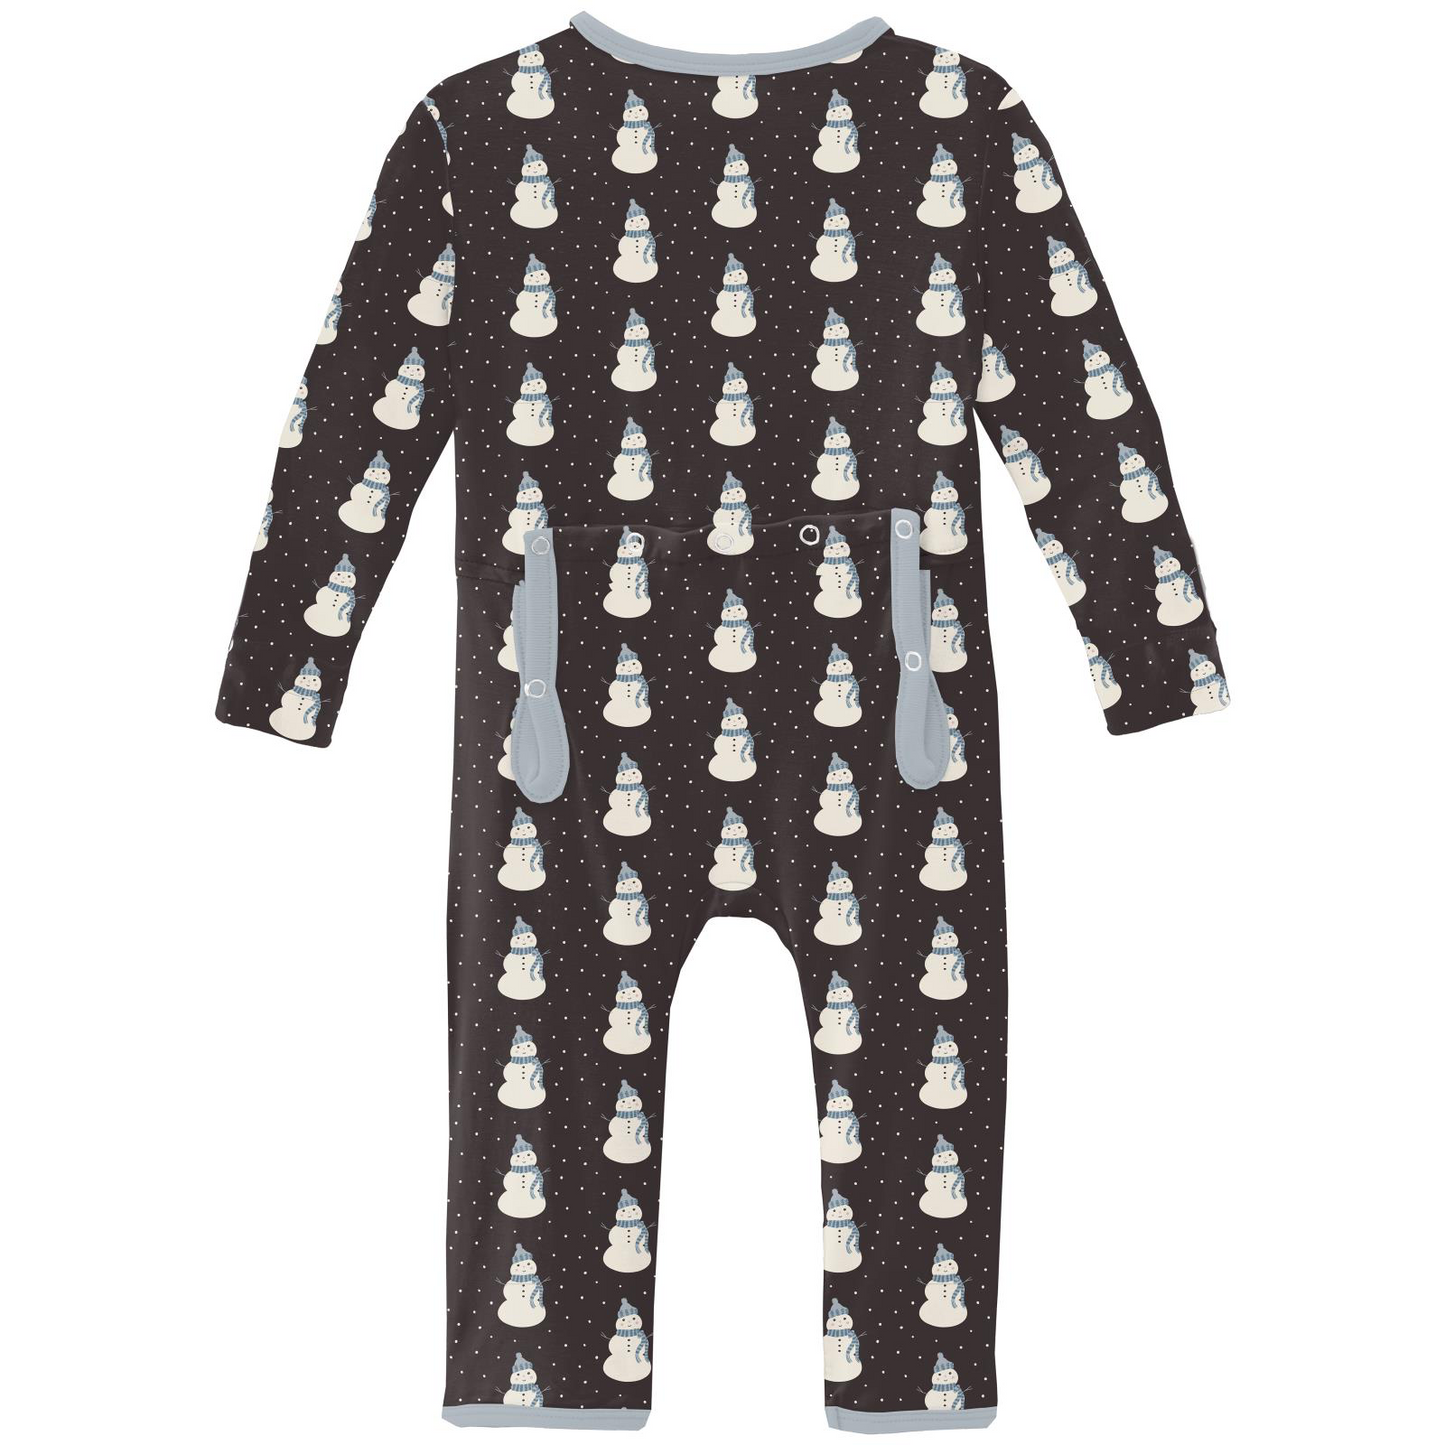 Midnight Tiny Snowman Print Coverall with 2 Way Zipper